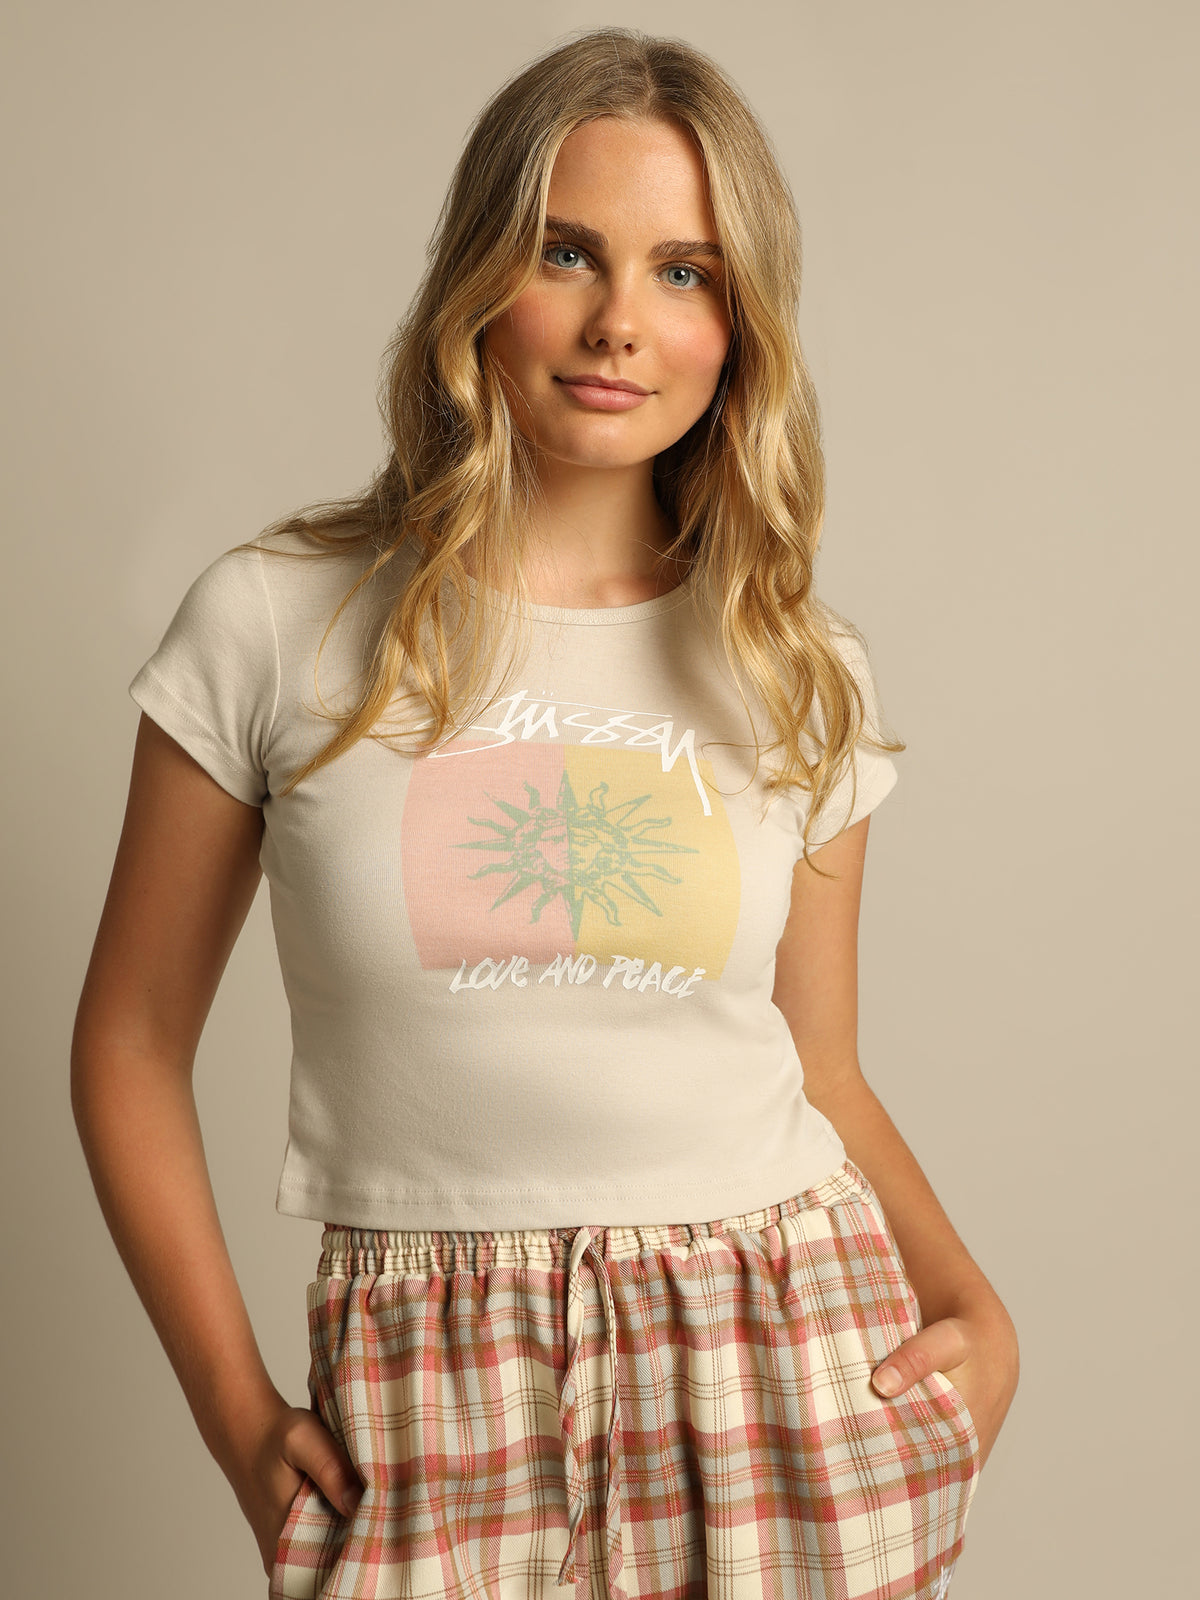 Sunsets Rib T-Shirt in White Sand